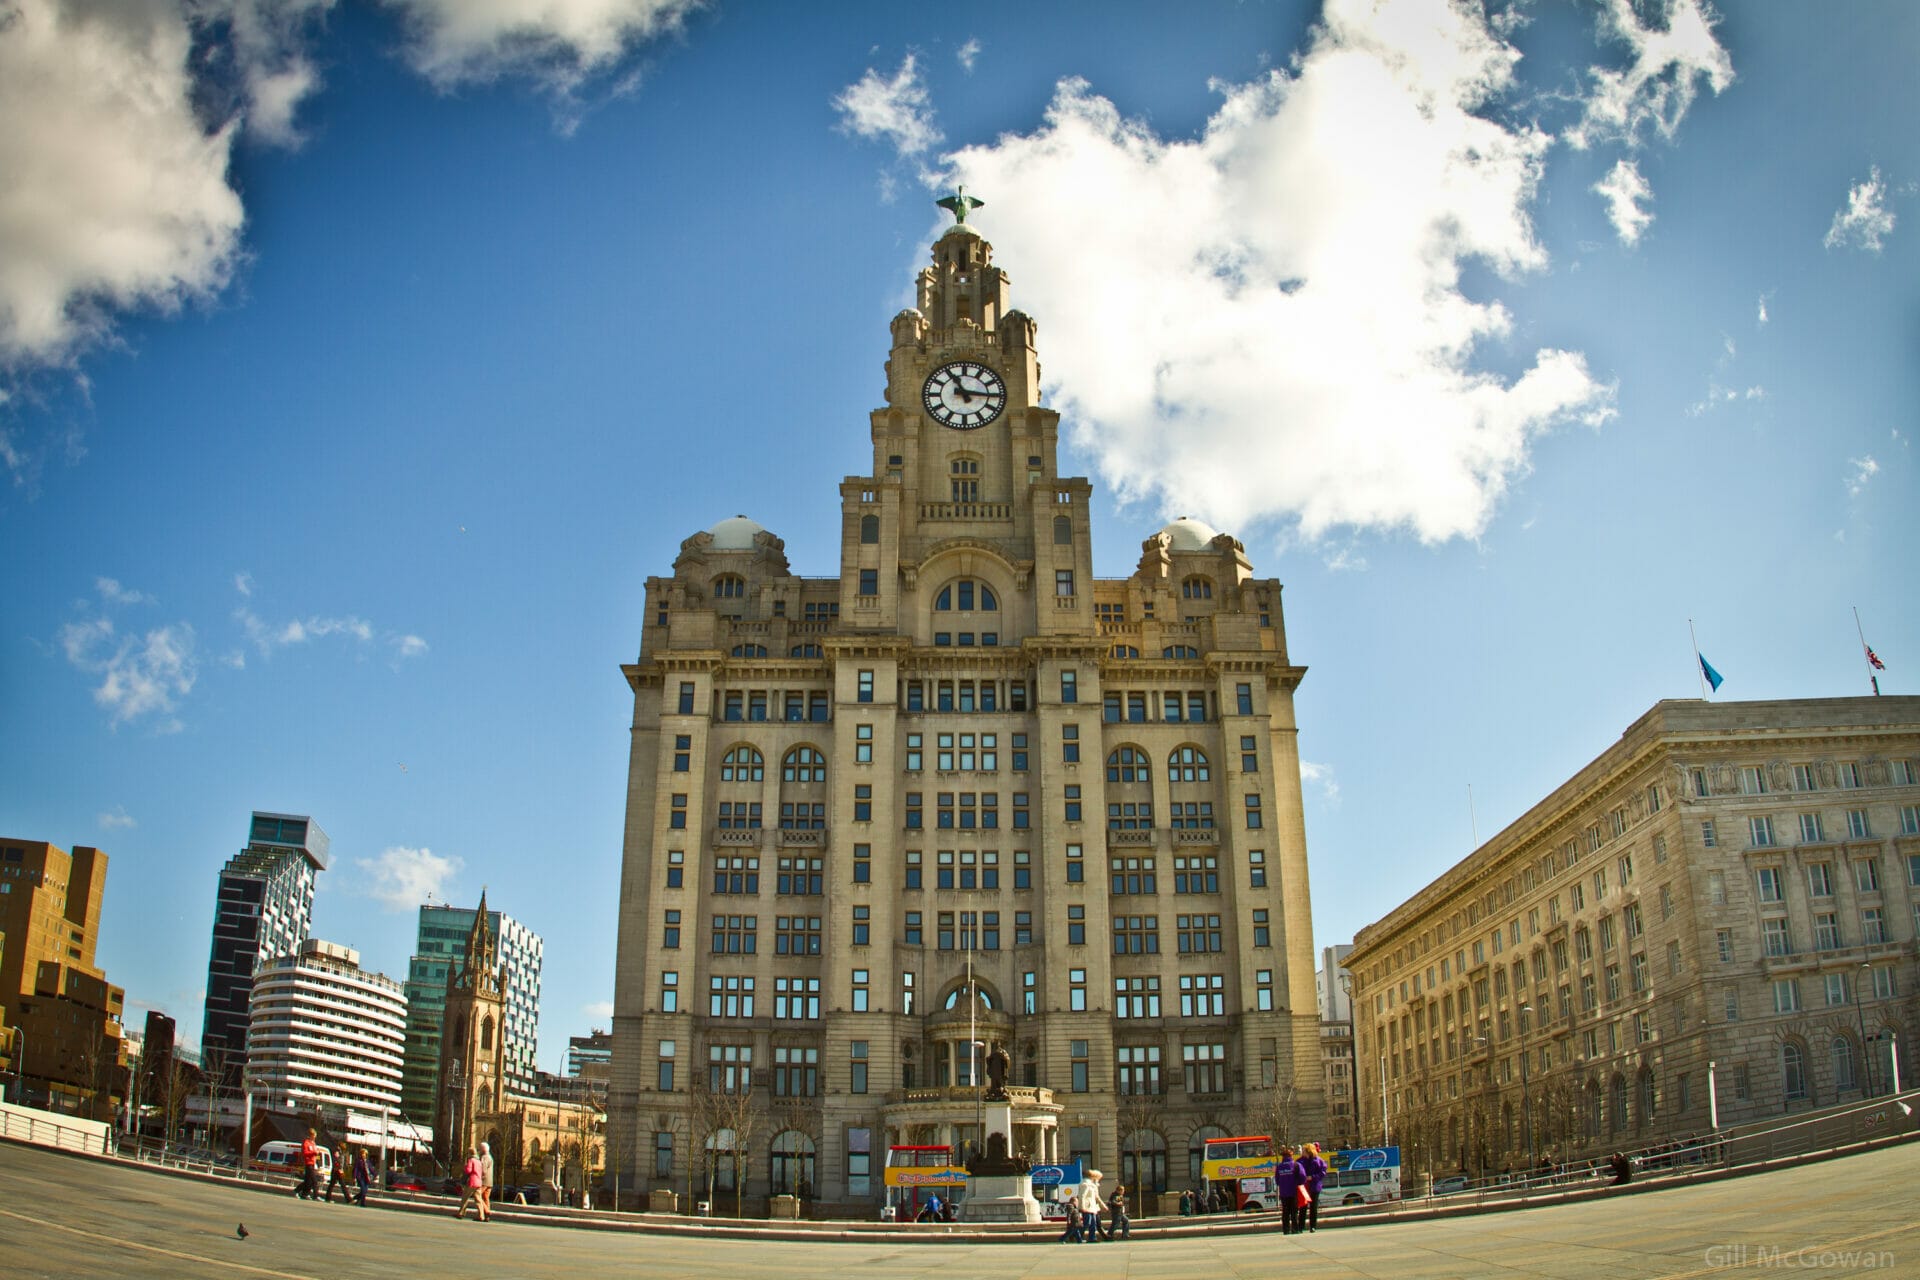 Architectural Photography - Photo of the Liver Buildings in Liverpool taken on a Welshot Photographic Workshop